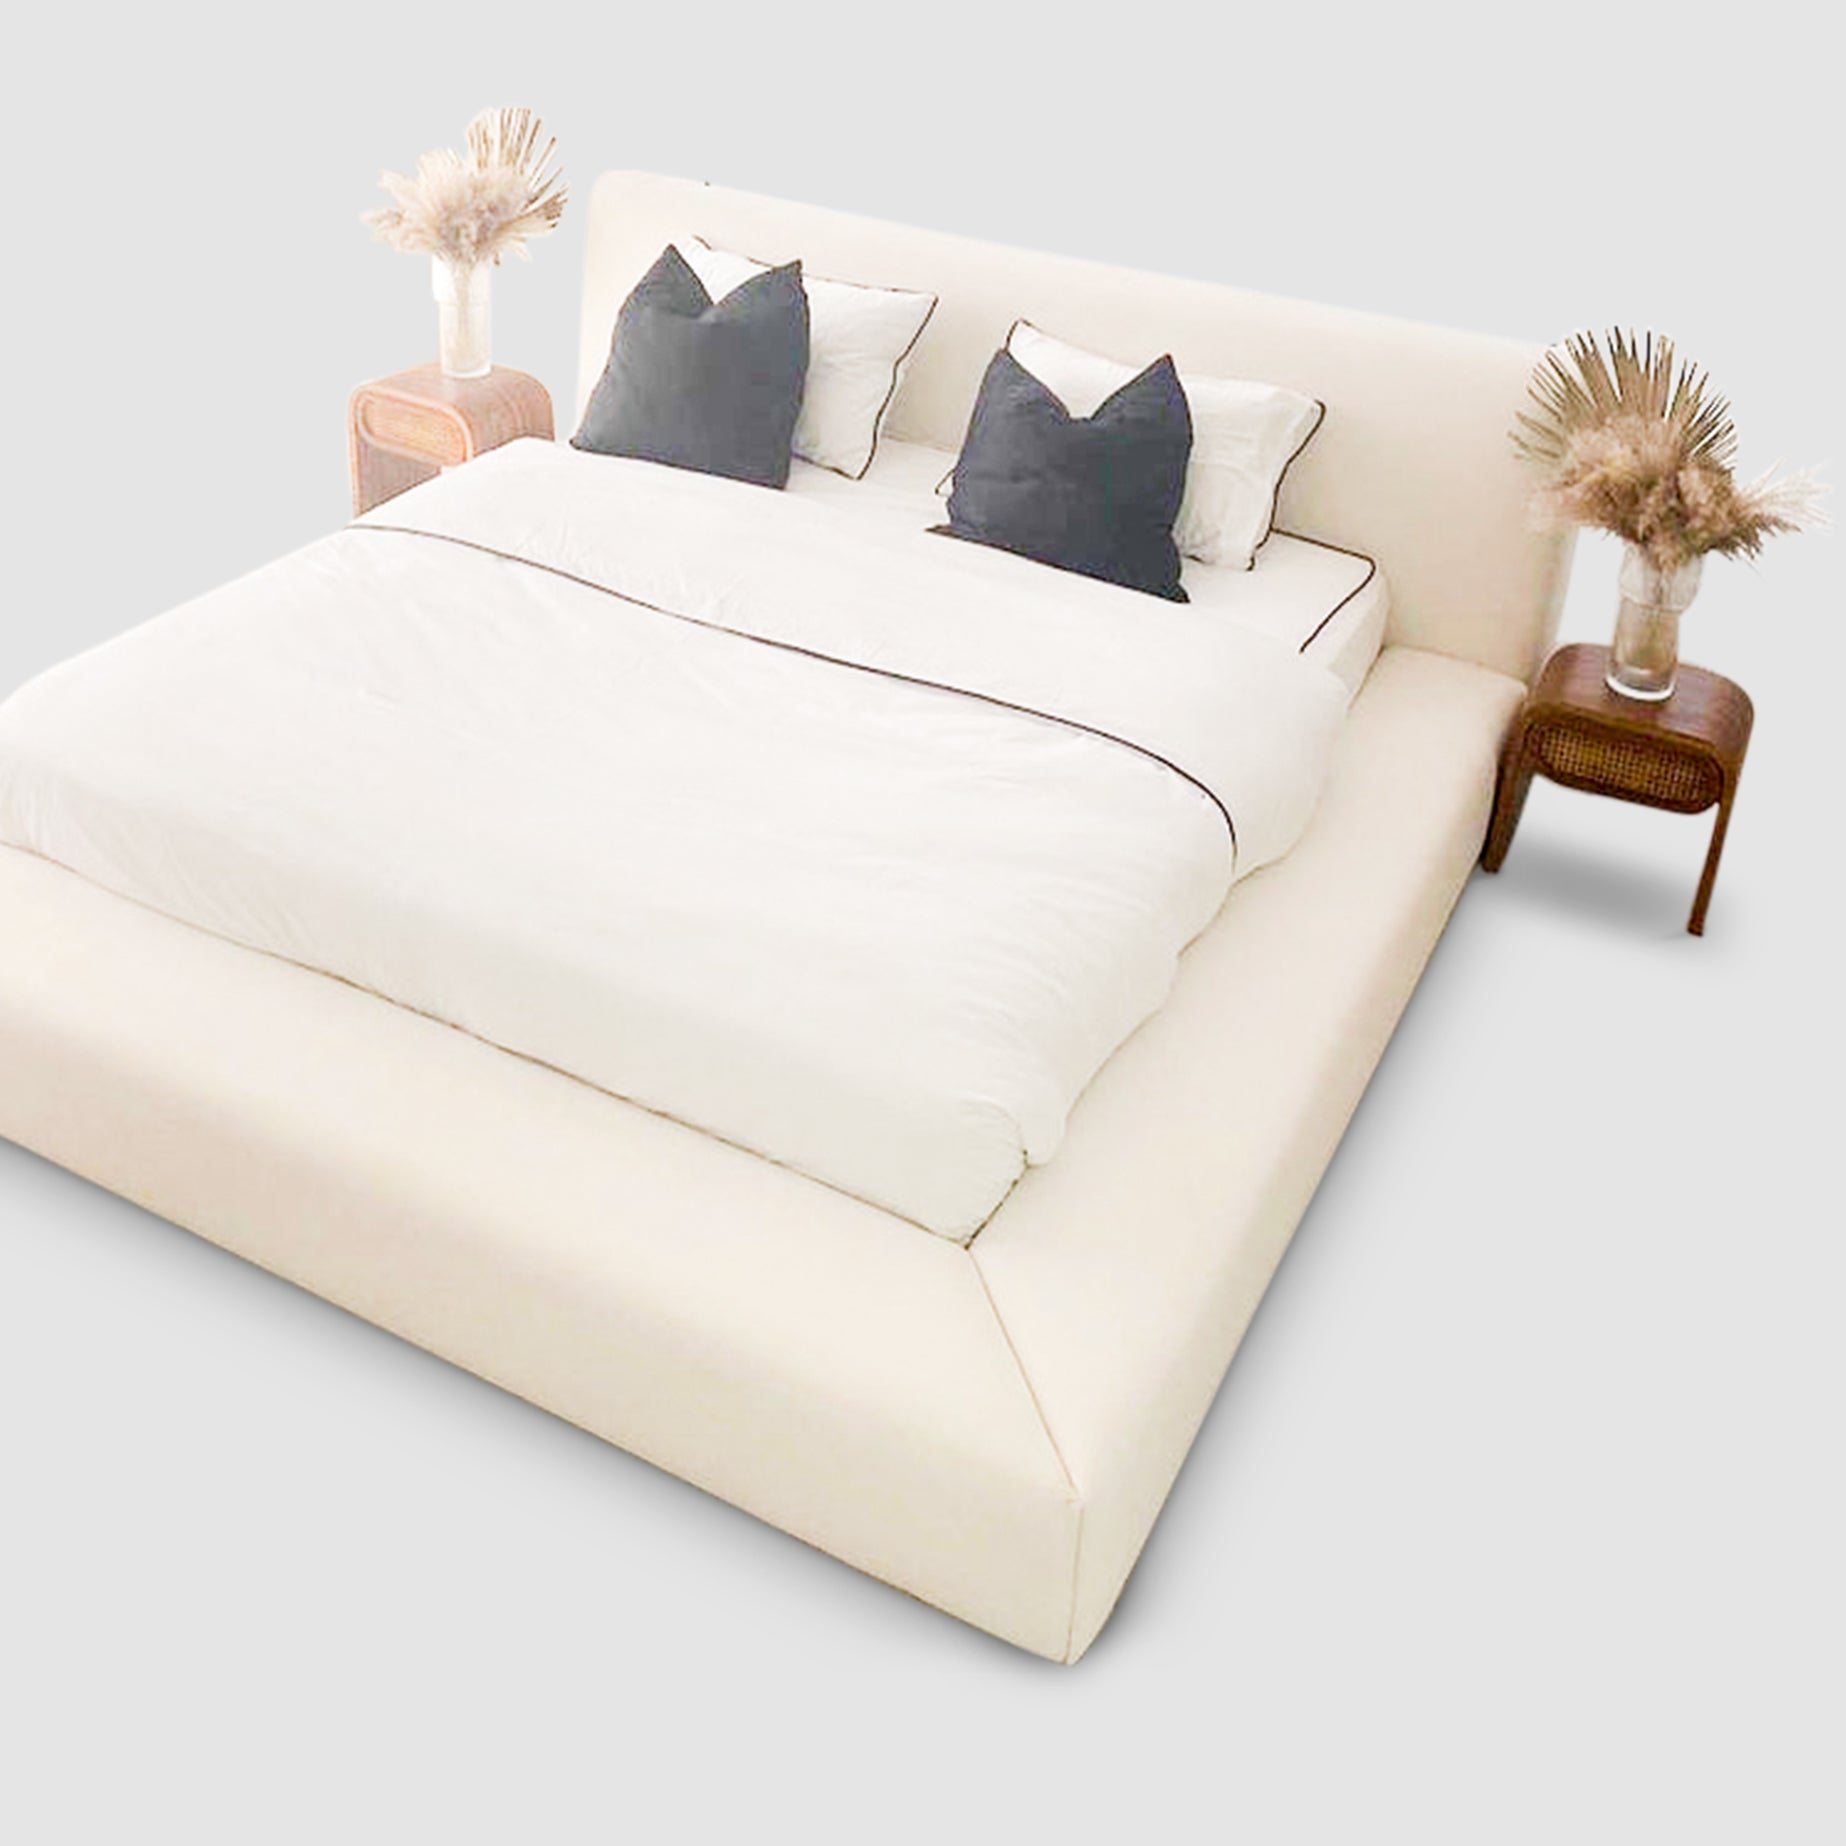 Dreamy Stella bed: customizable platform bed for a serene sleep sanctuary. Stain-resistant fabric for easy care.